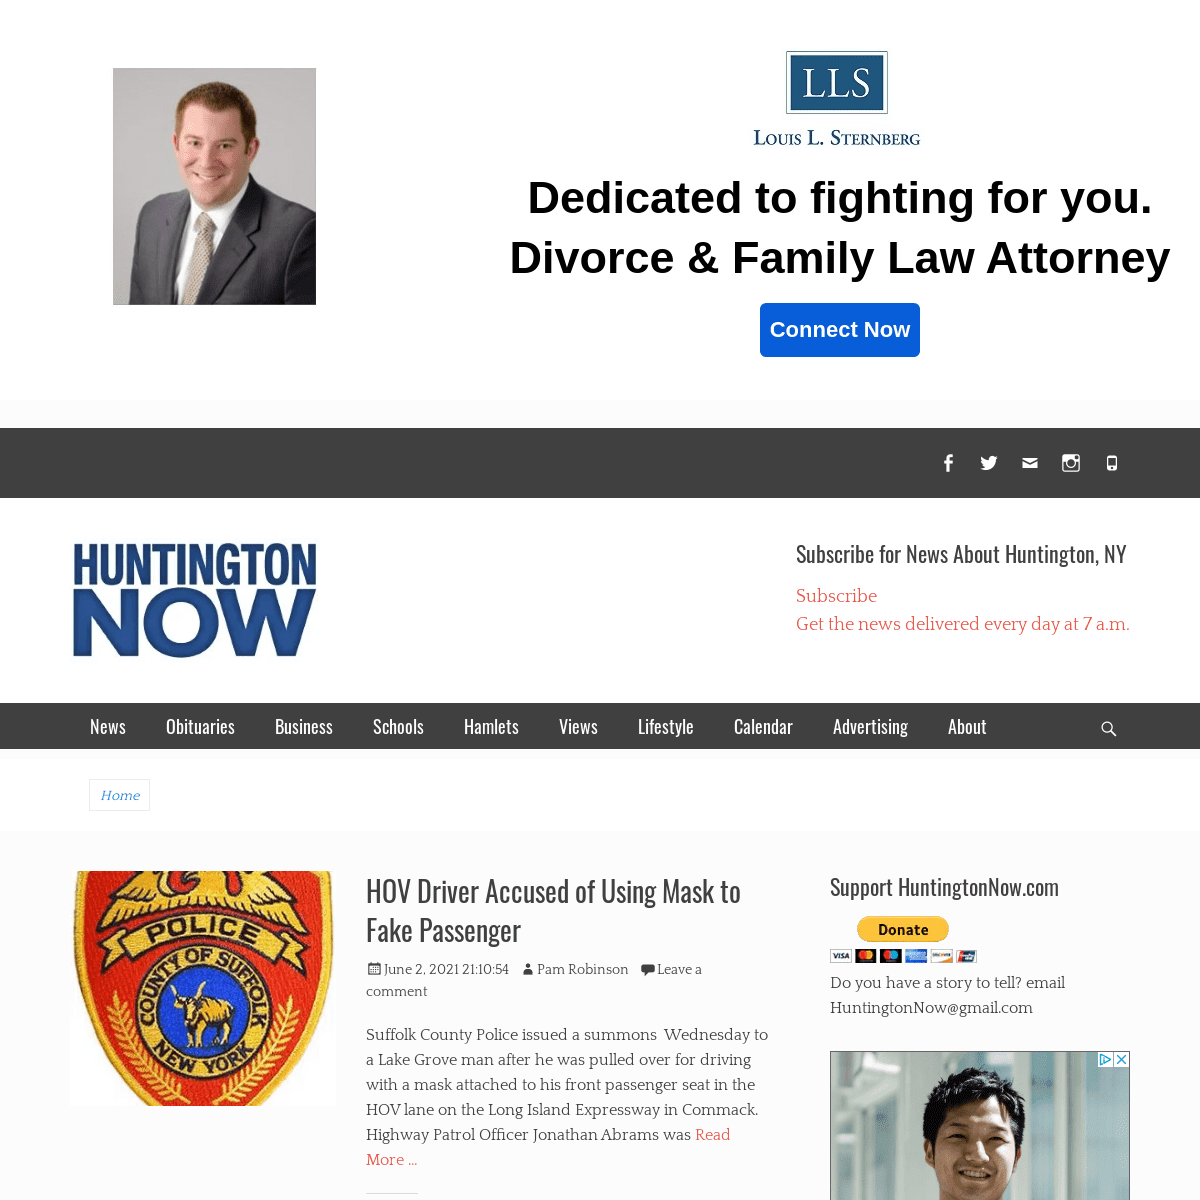 A complete backup of https://huntingtonnow.com